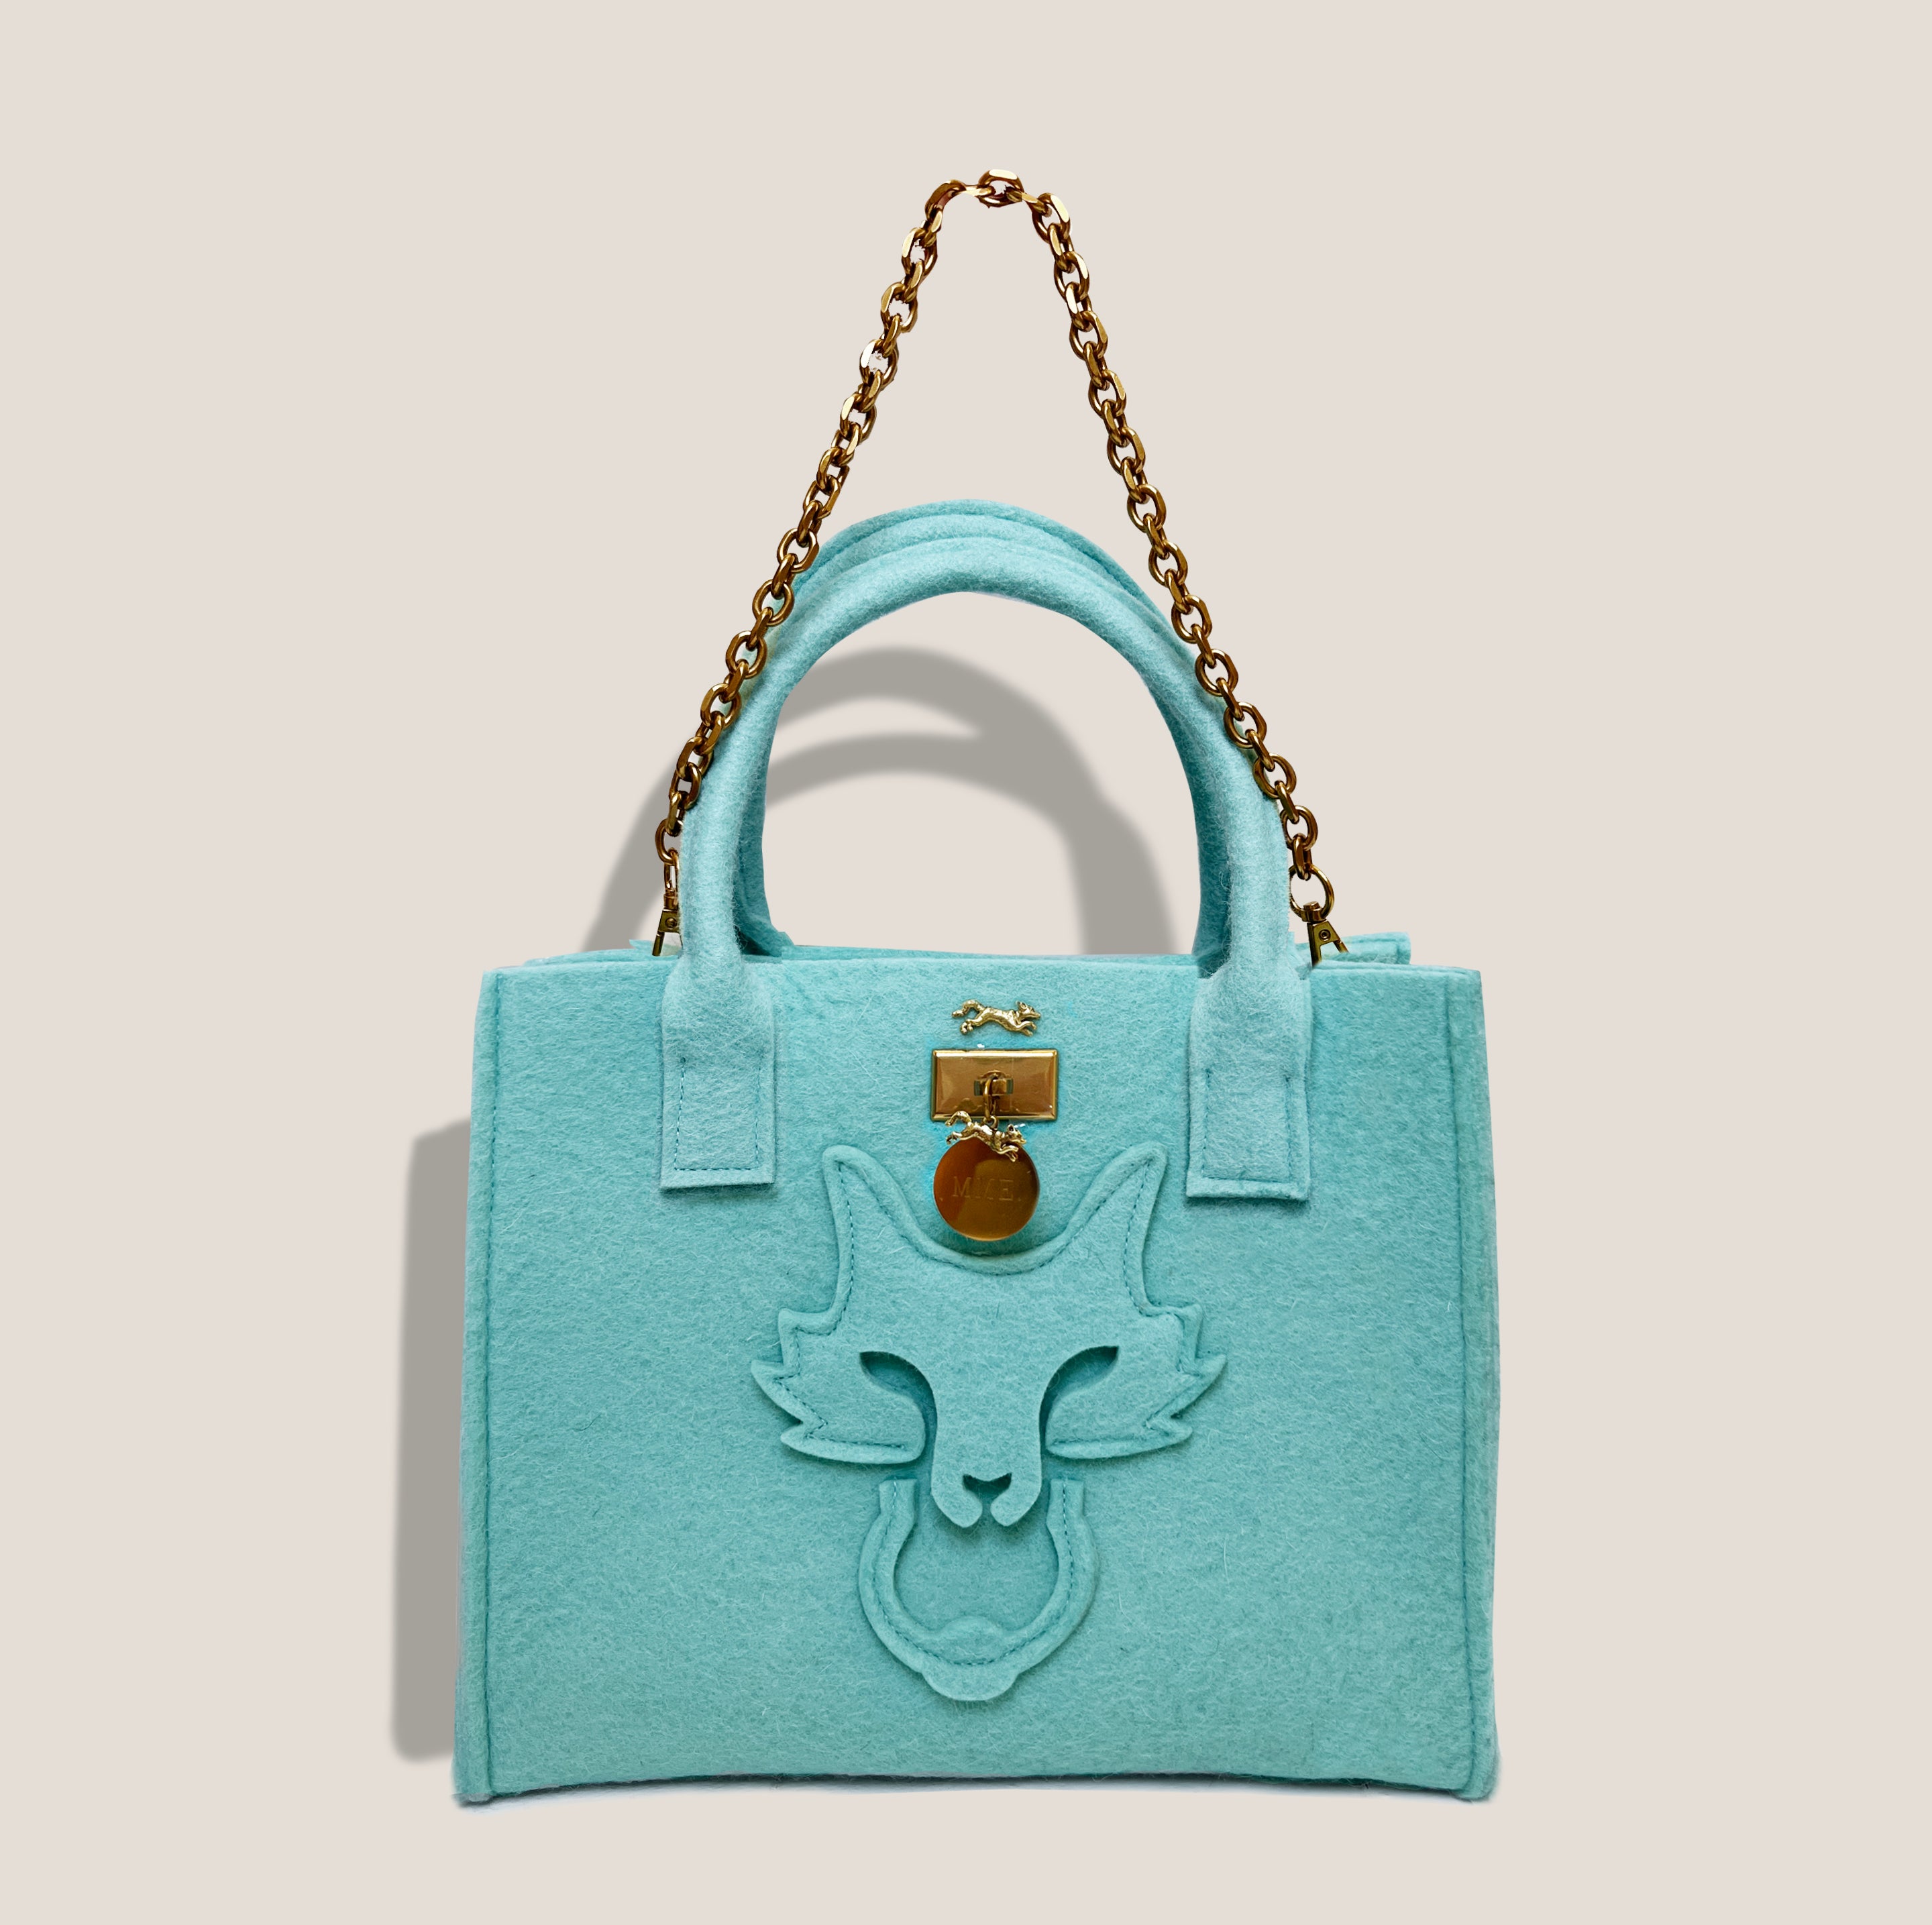 THE BRUNCH TOTE - Breakfast Blue Tote